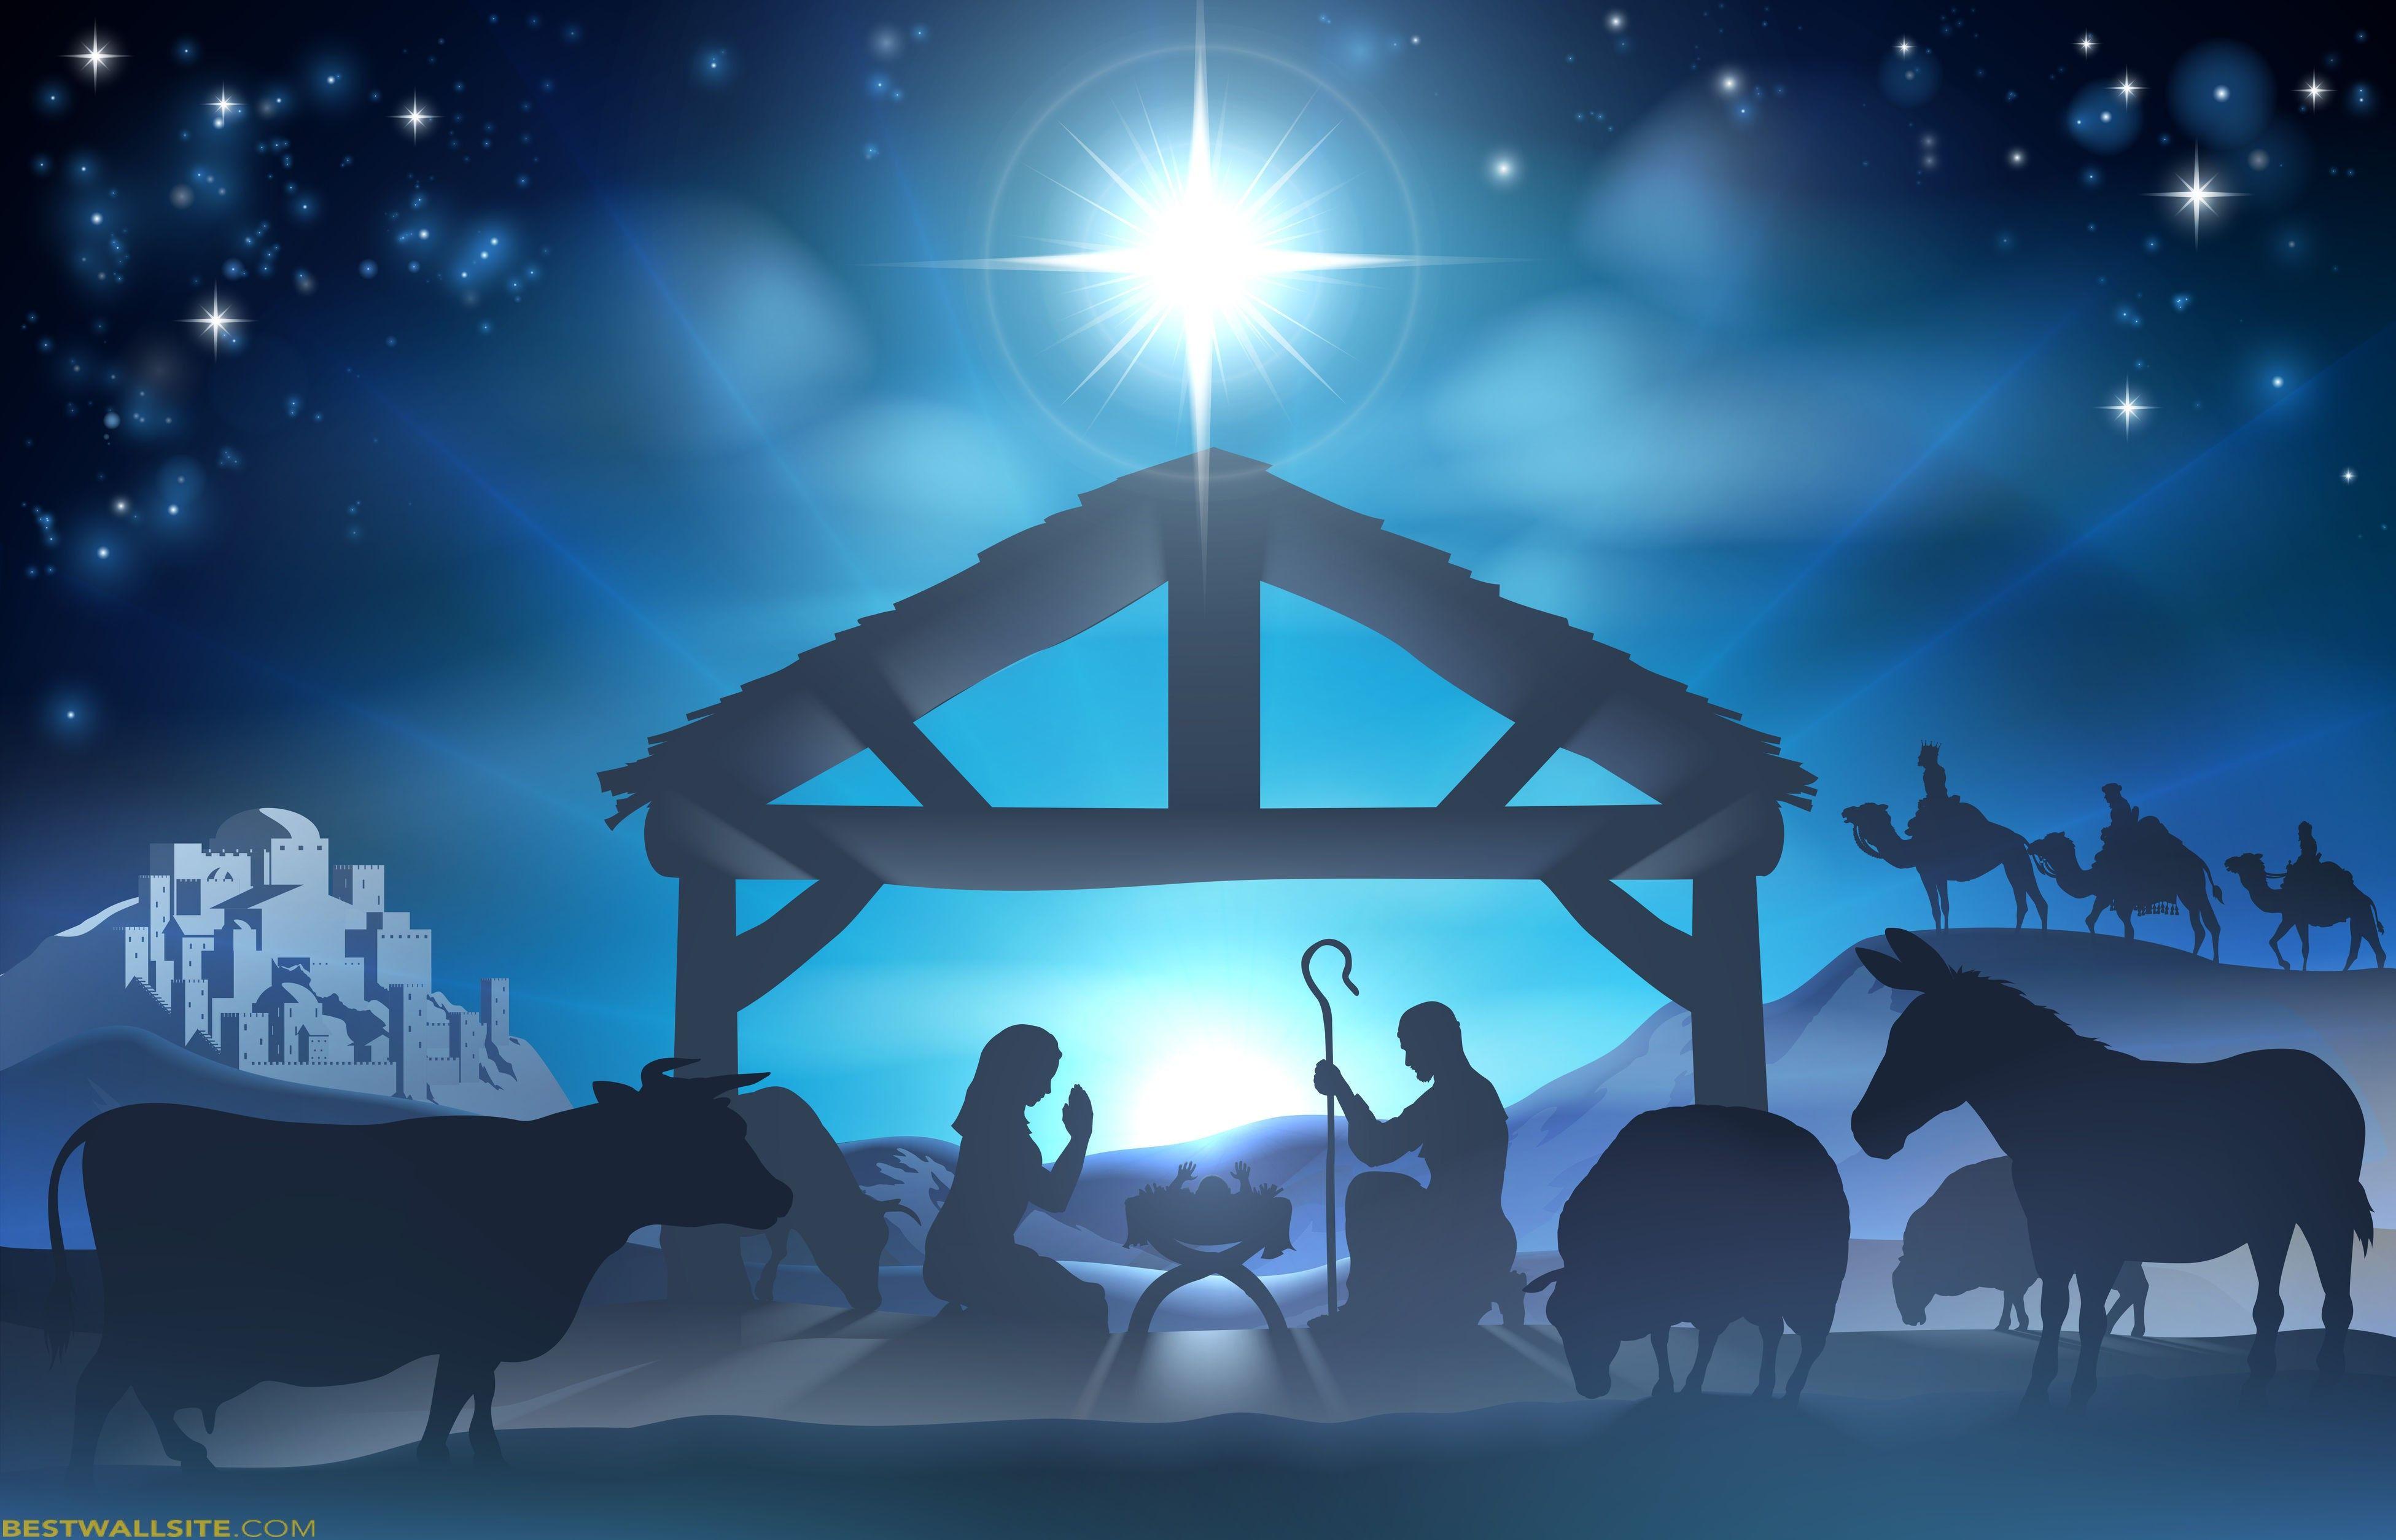 Manger Photos Download The BEST Free Manger Stock Photos  HD Images